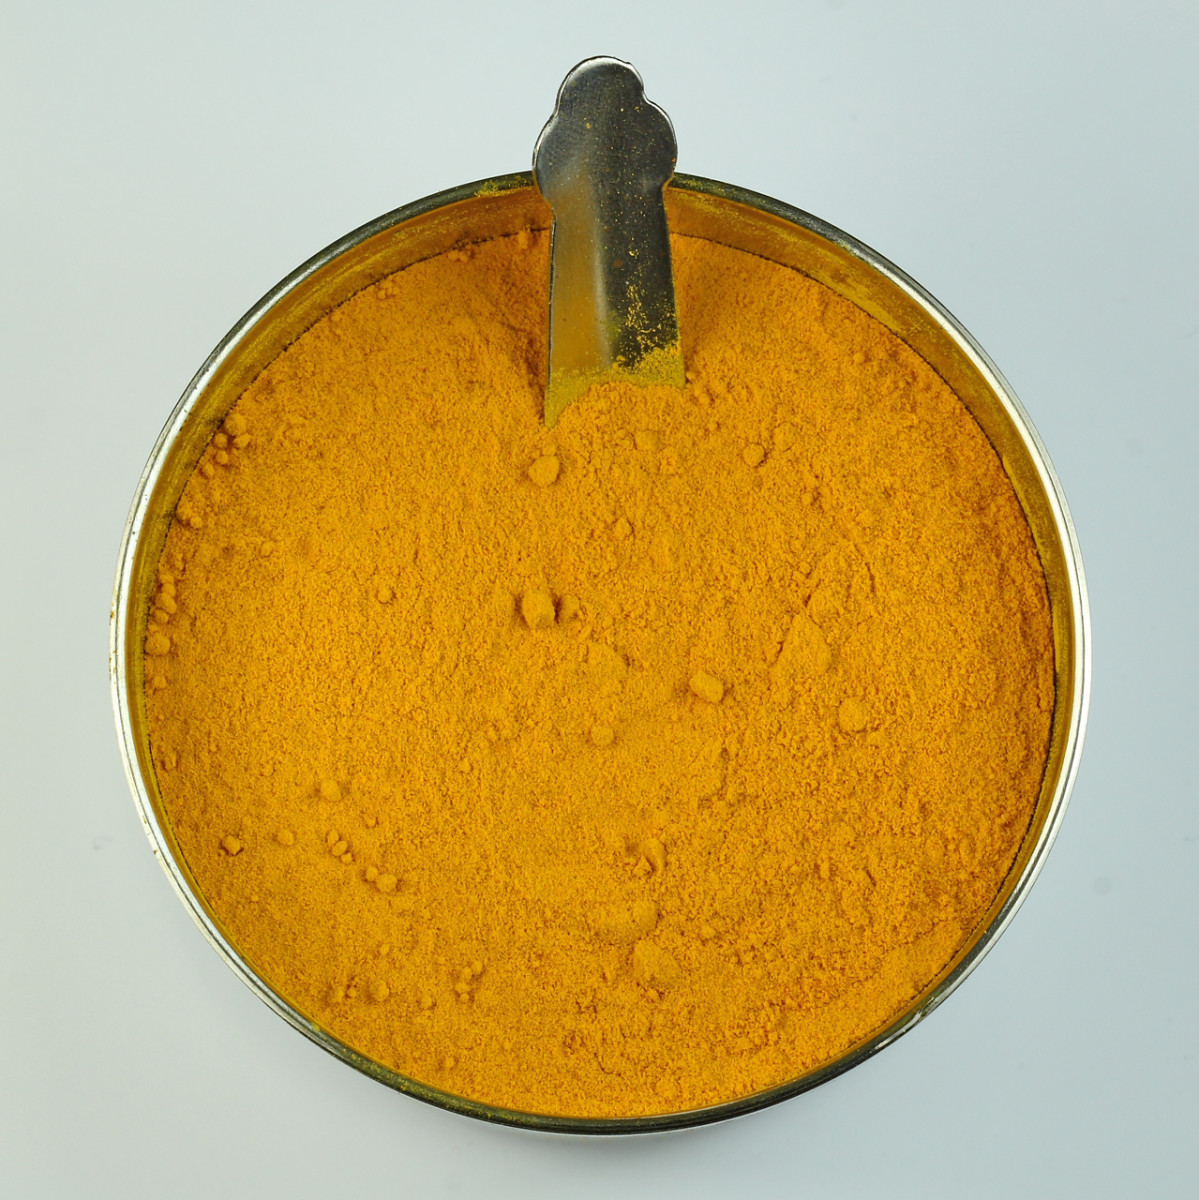 Turmeric powder is a strong colorant without a strong flavor.